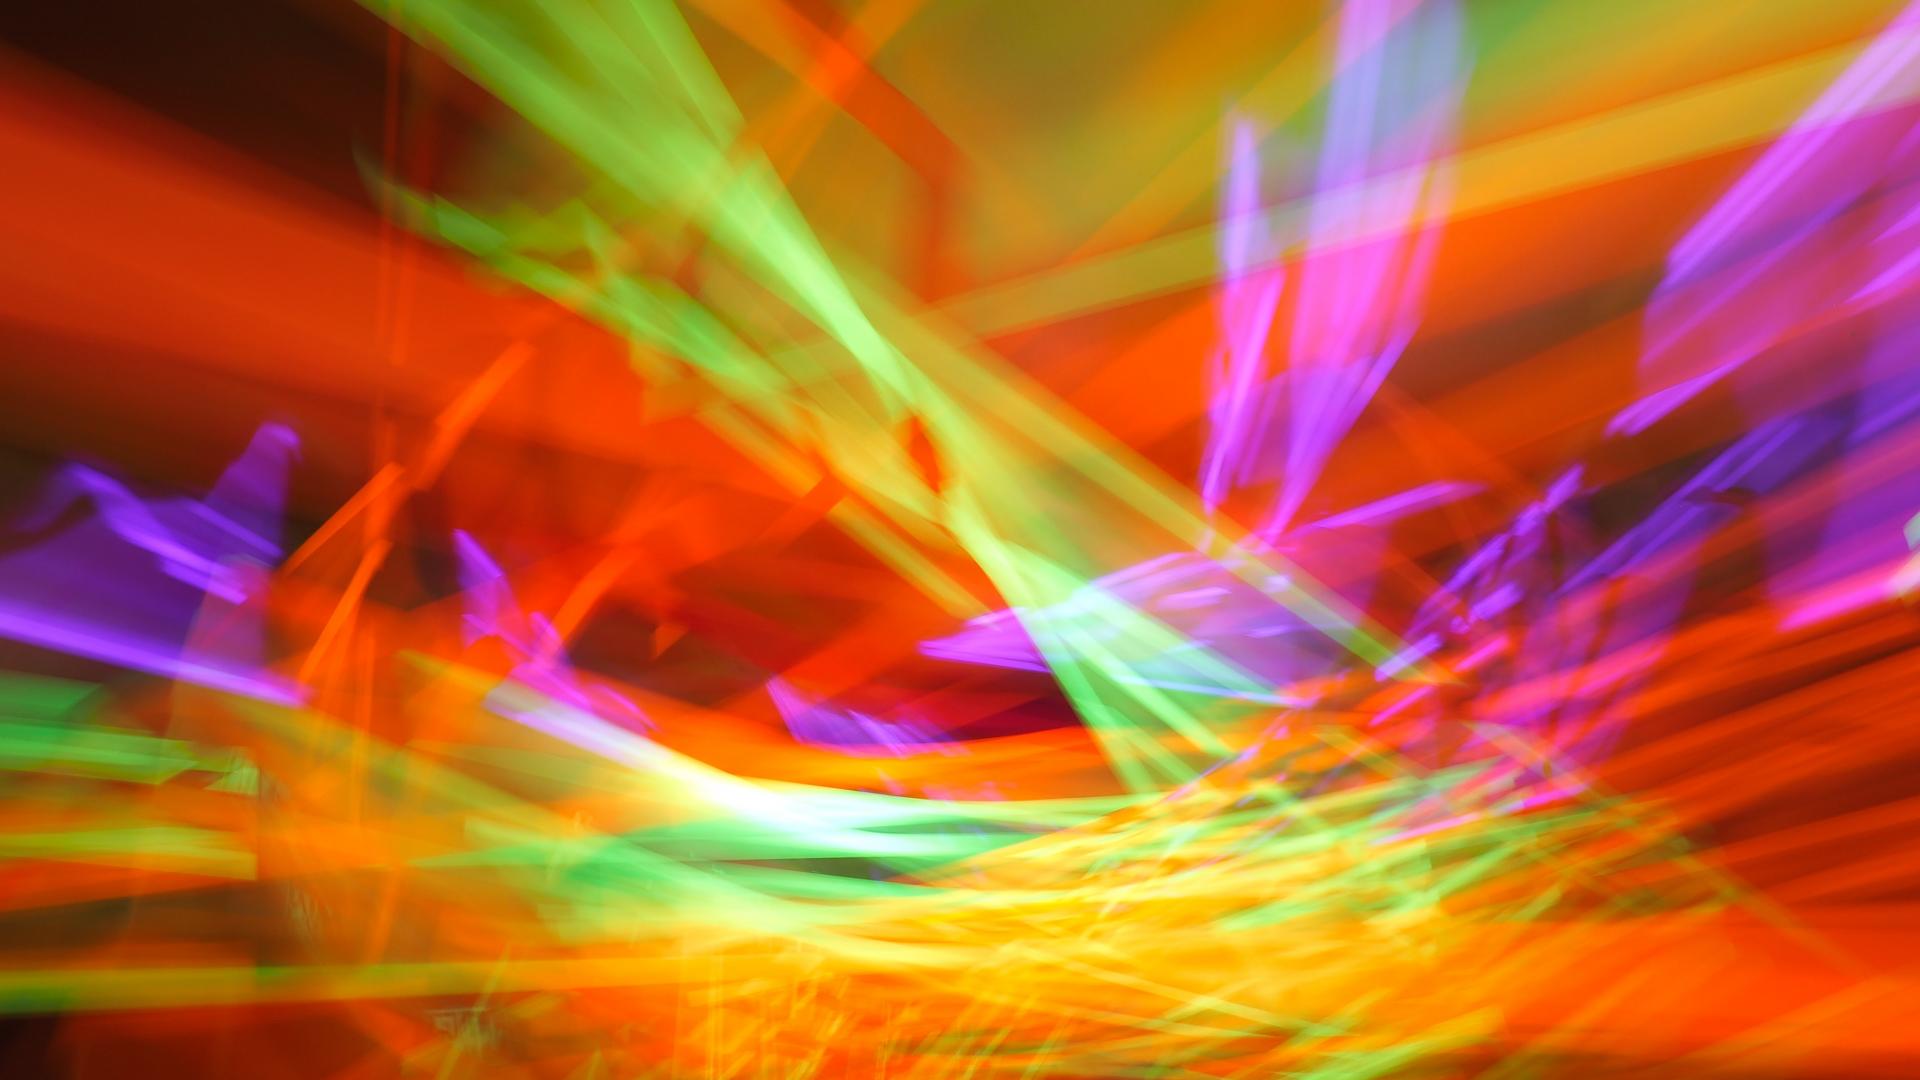 Abstract image of lights